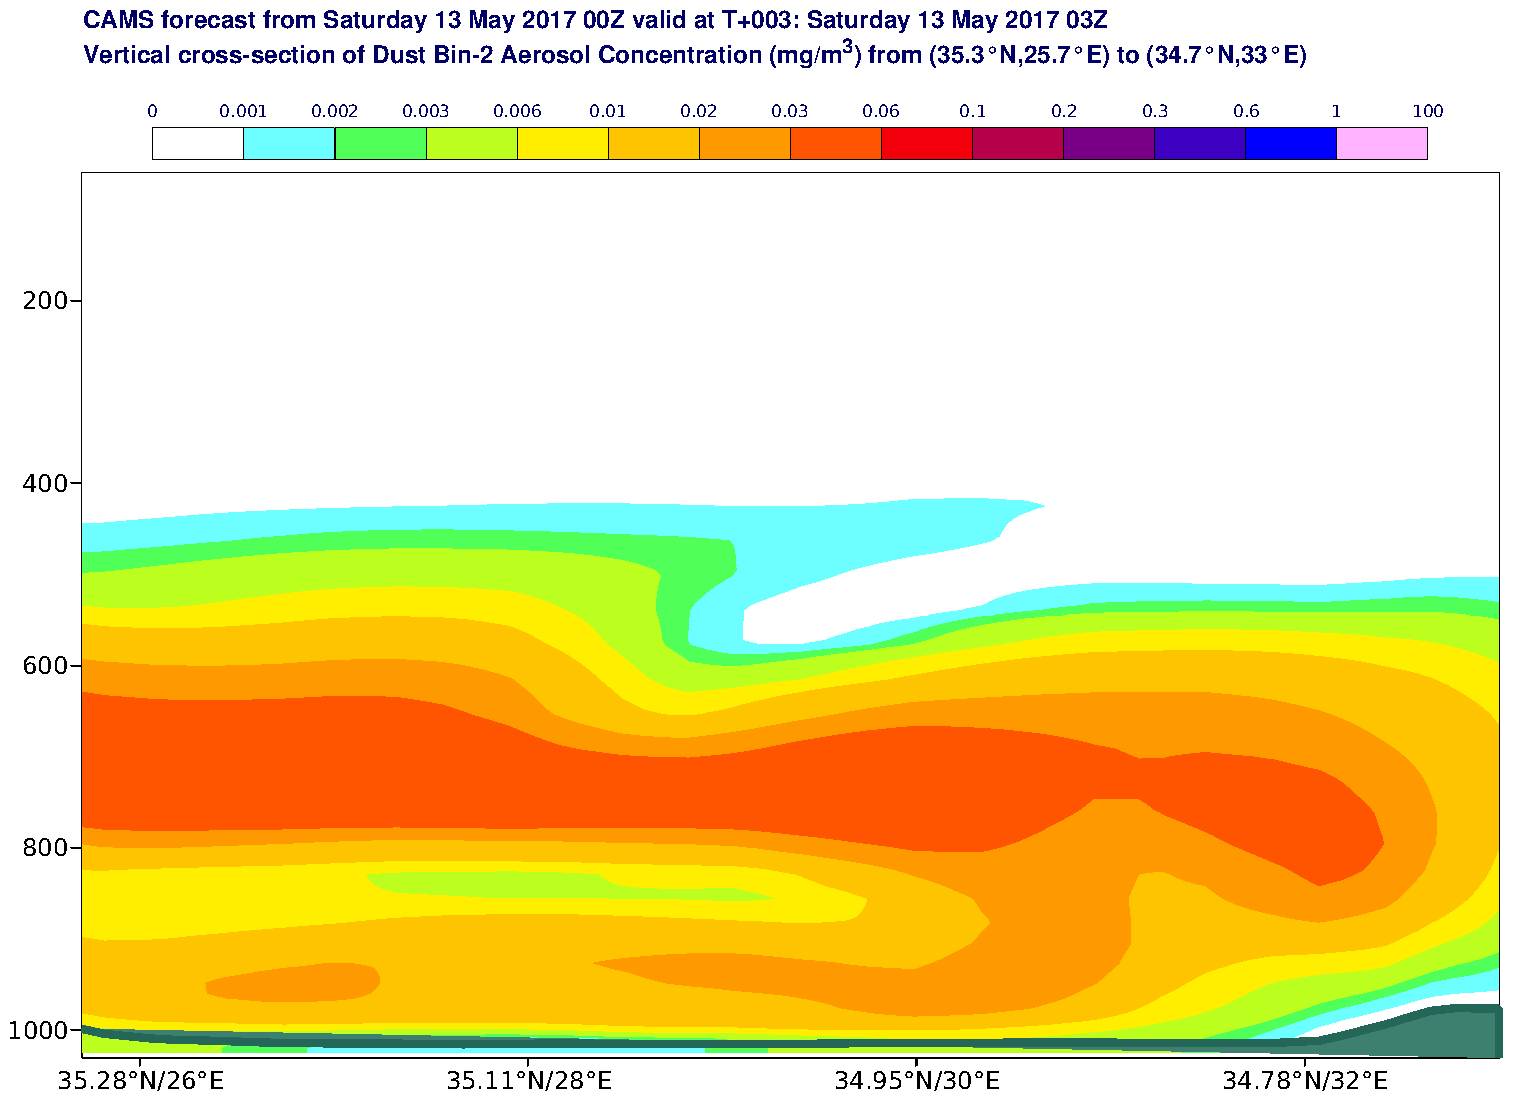 Vertical cross-section of Dust Bin-2 Aerosol Concentration (mg/m3) valid at T3 - 2017-05-13 03:00